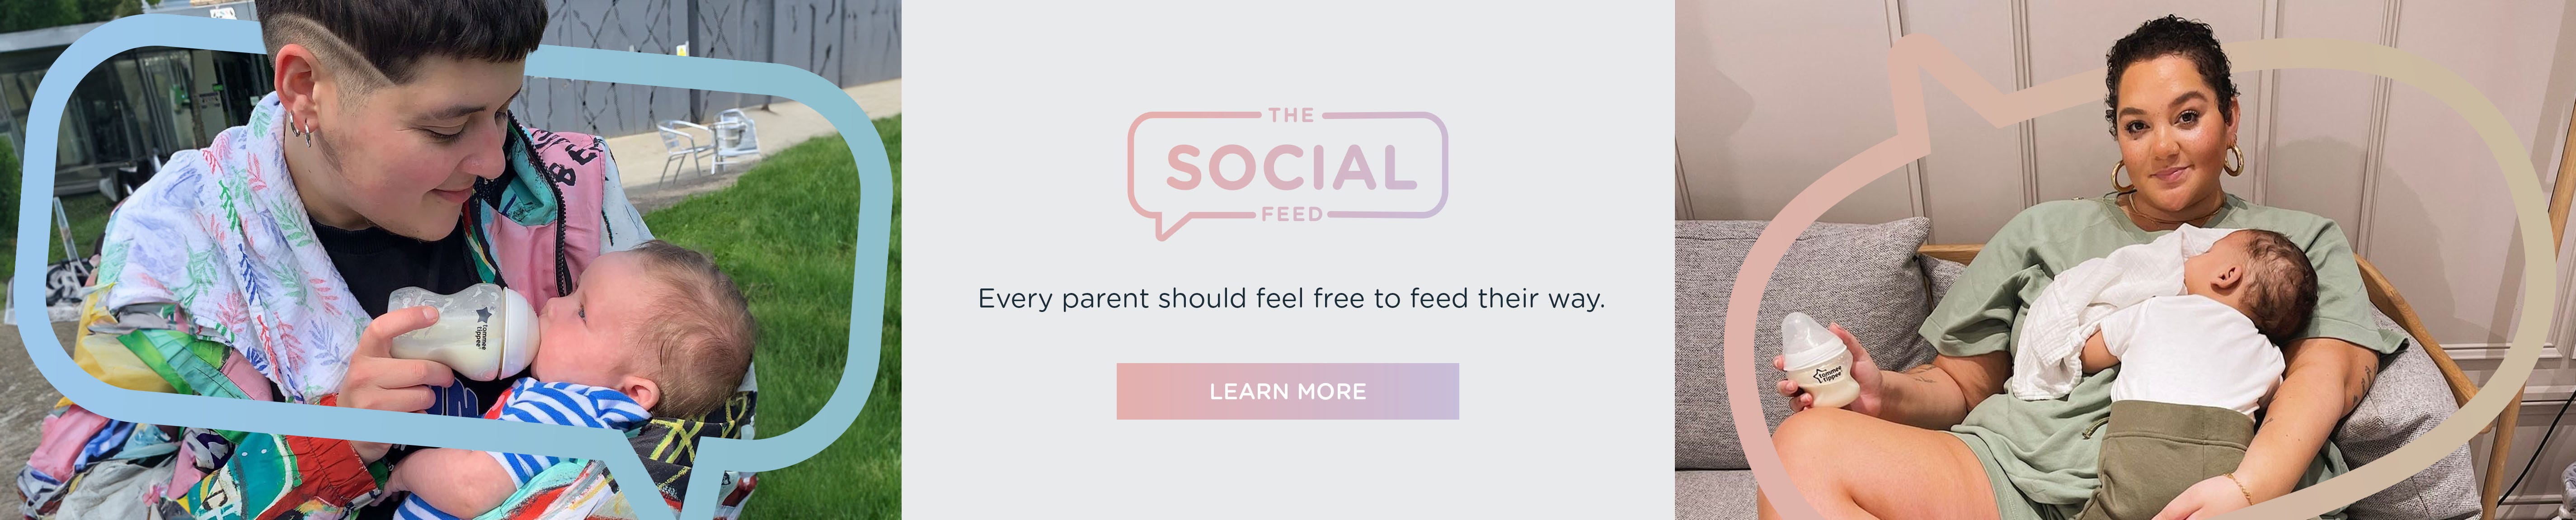 Text stating 'The Social Feed - every parent should feel free to feed thwir way ' with a learn more button. There are also images on both sides of the text showing parents feeding children